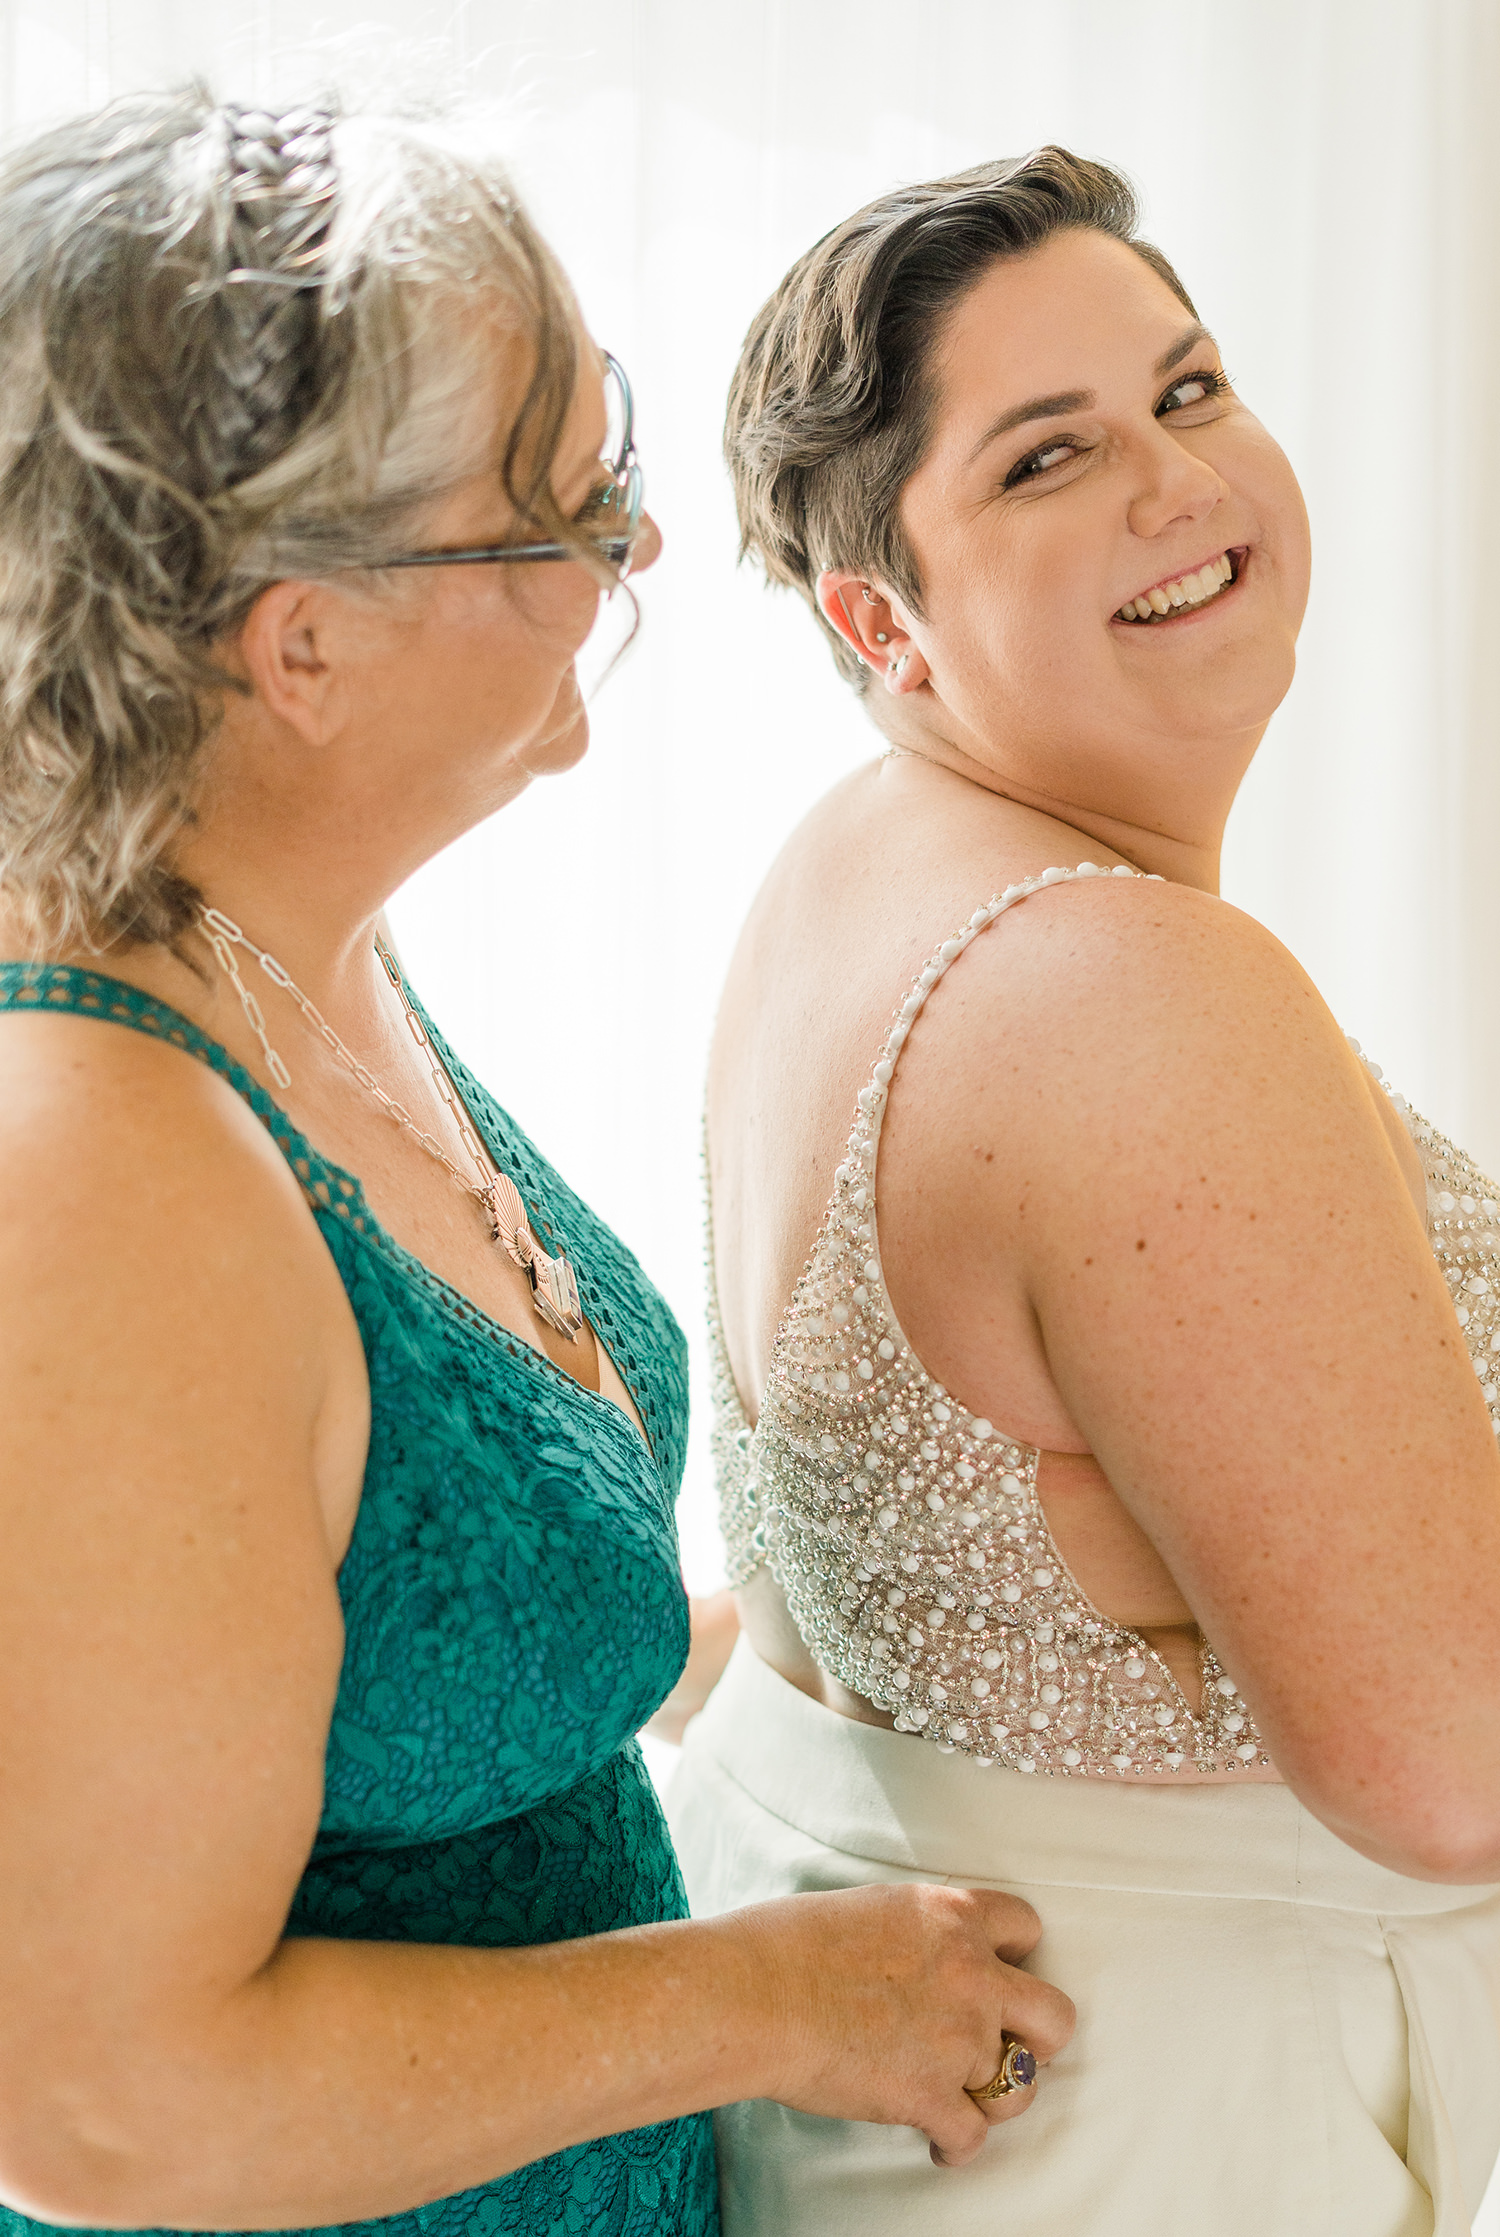 bridal portraits at an lgbtq private estate capay wedding by Adrienne and Dani Photography